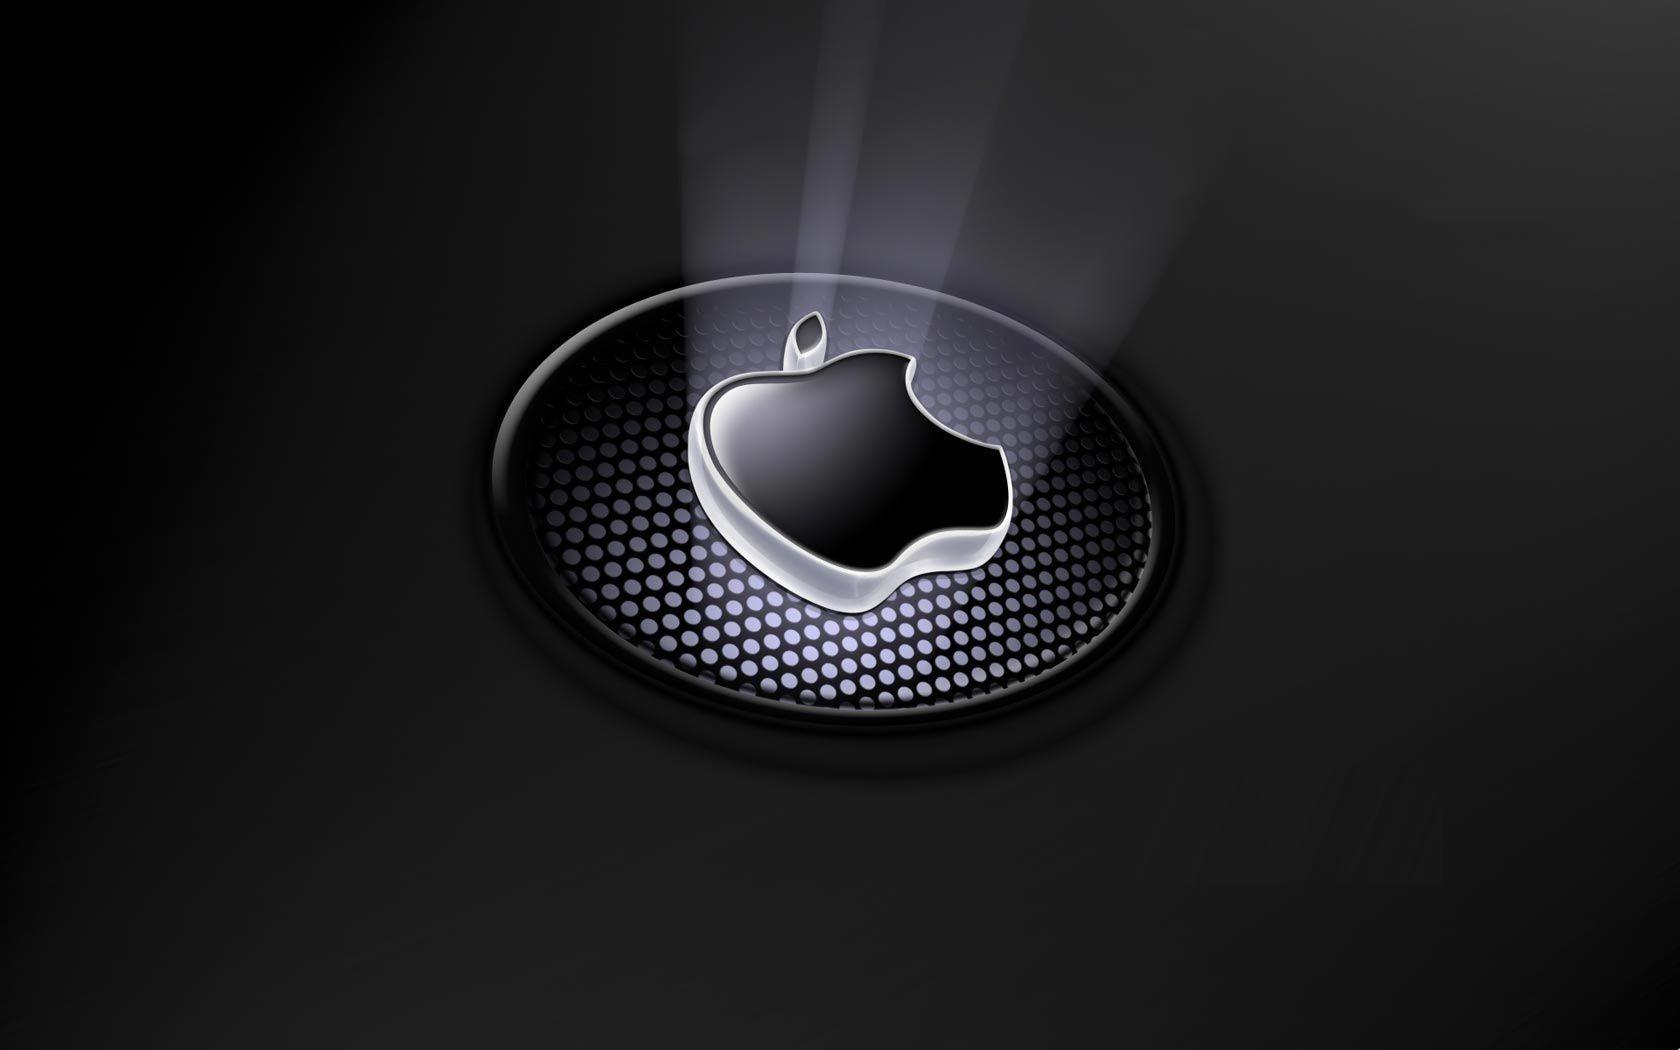 HD Apple Wallpaper Find best latest HD Apple Wallpaper for your PC